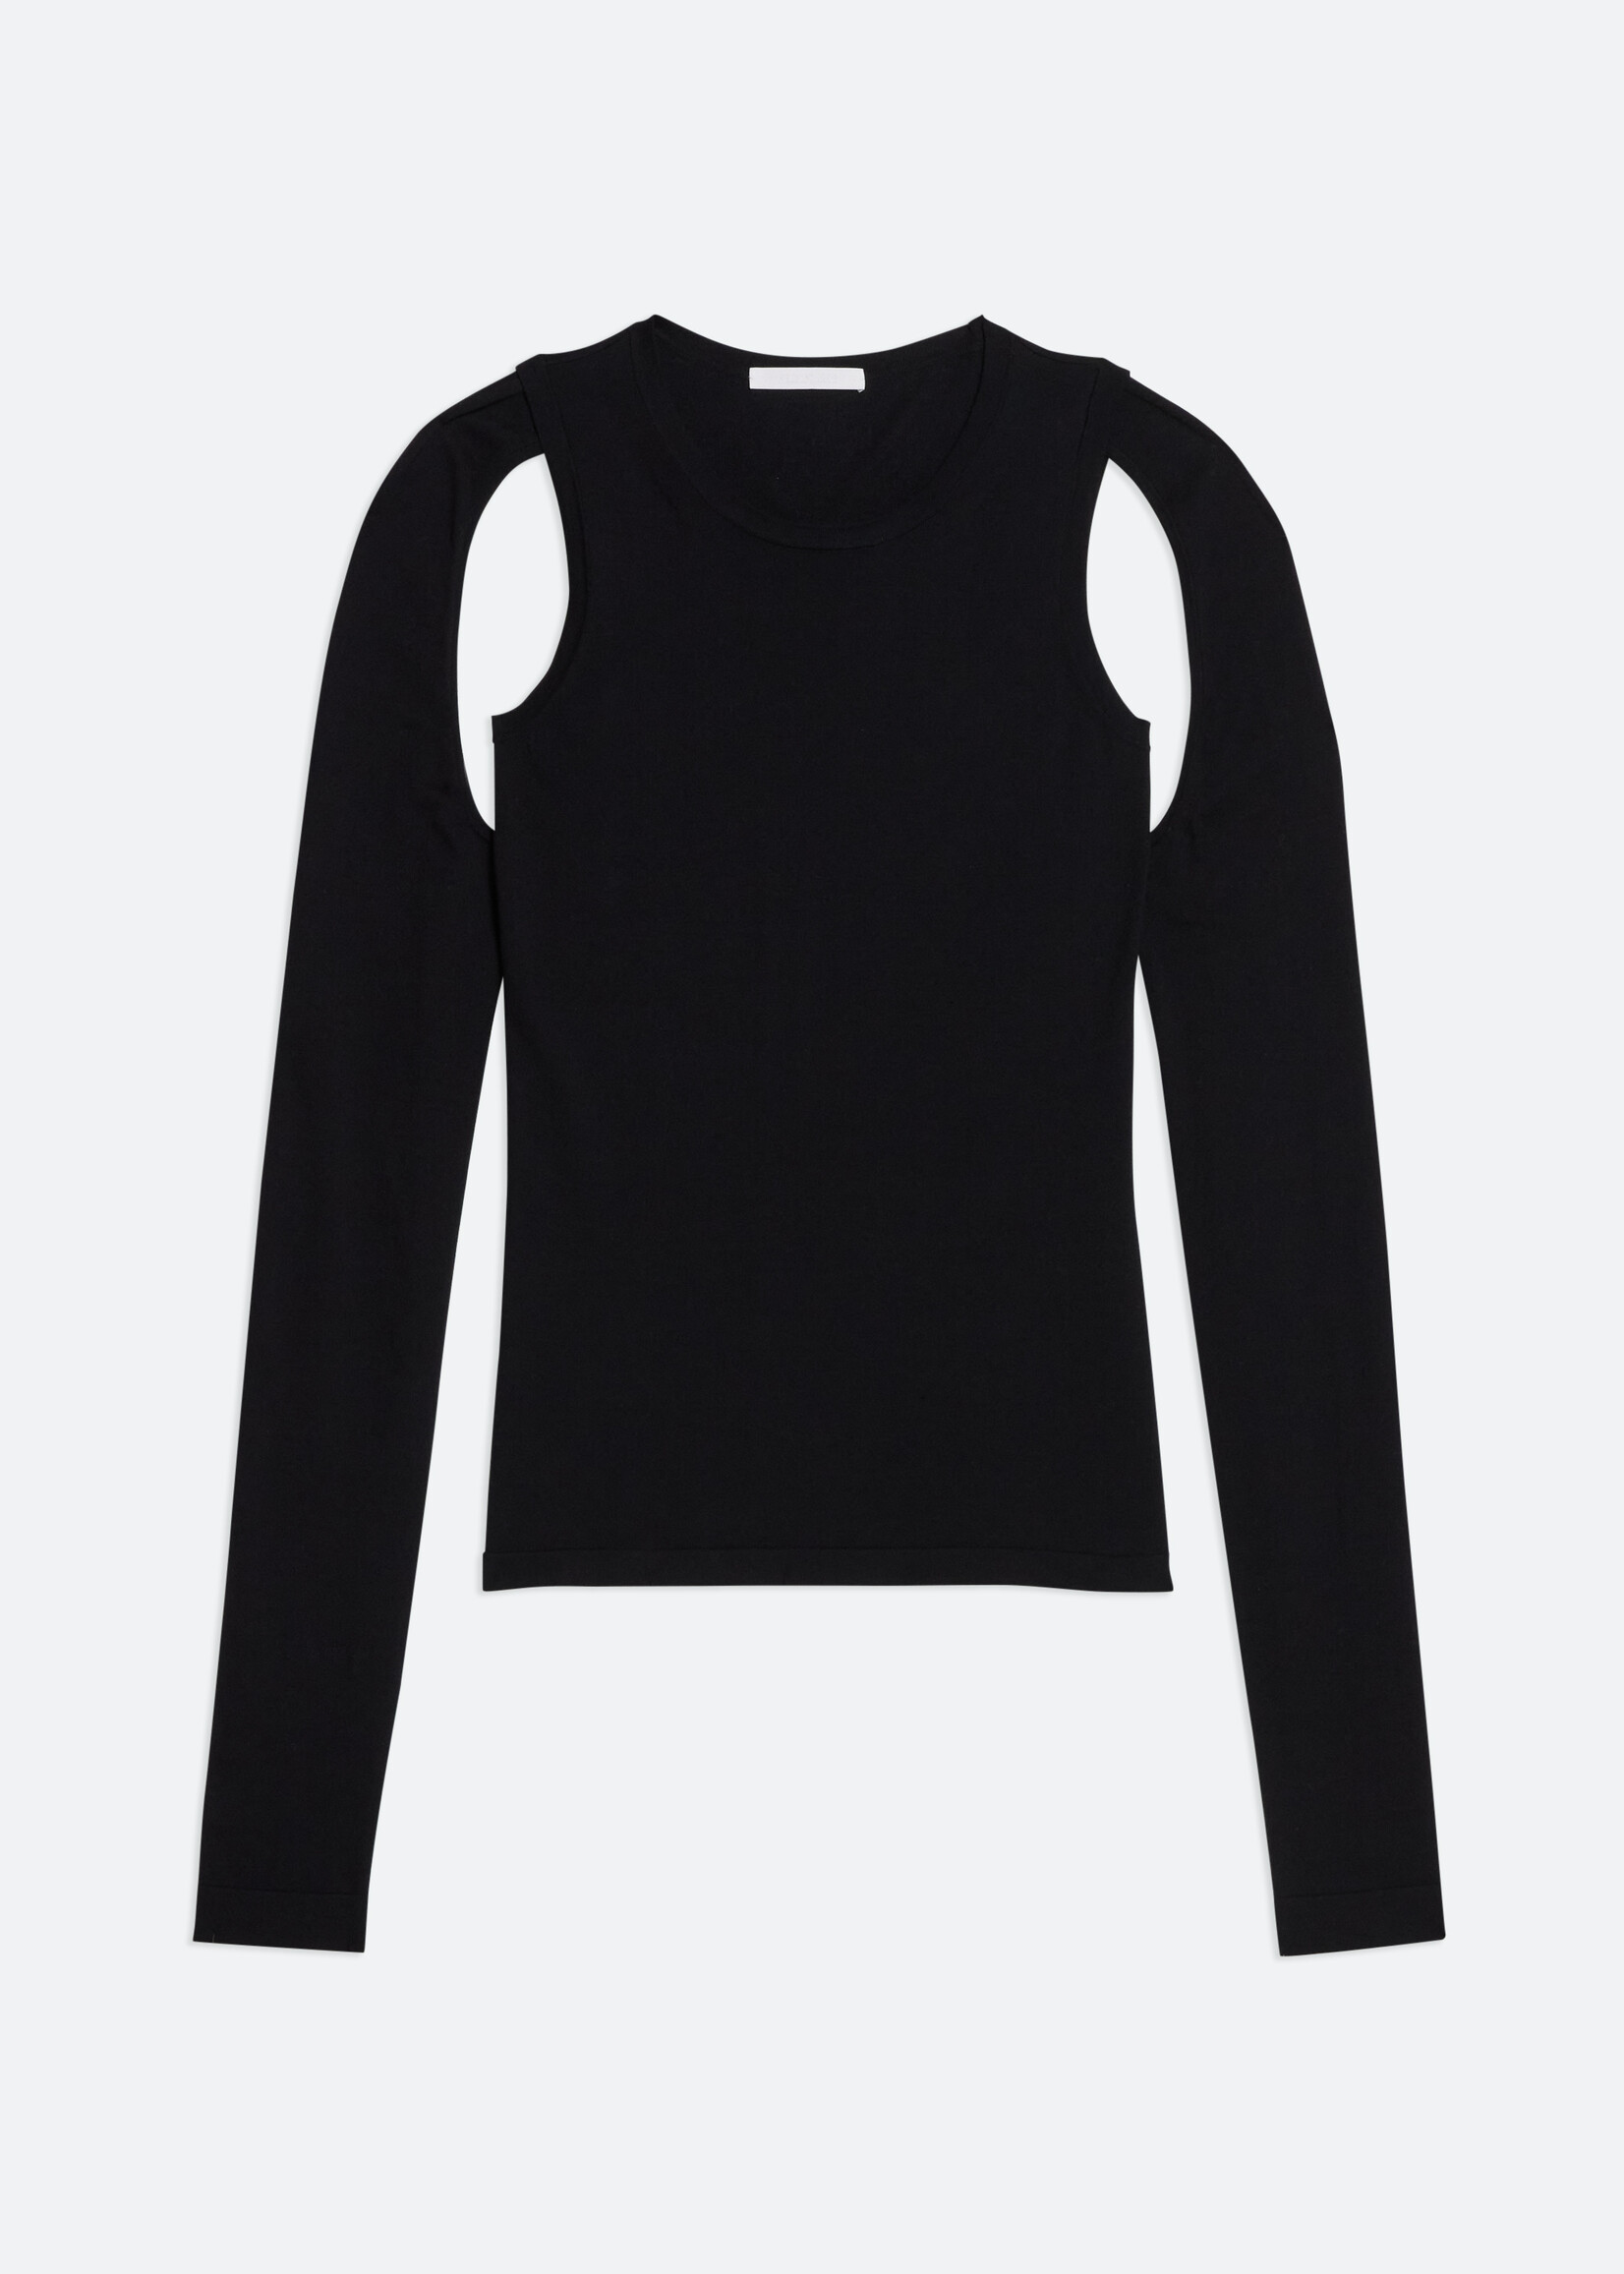 HELMUT LANG BY PETER DO Women's Cut Out Lightweight Sweater in Black